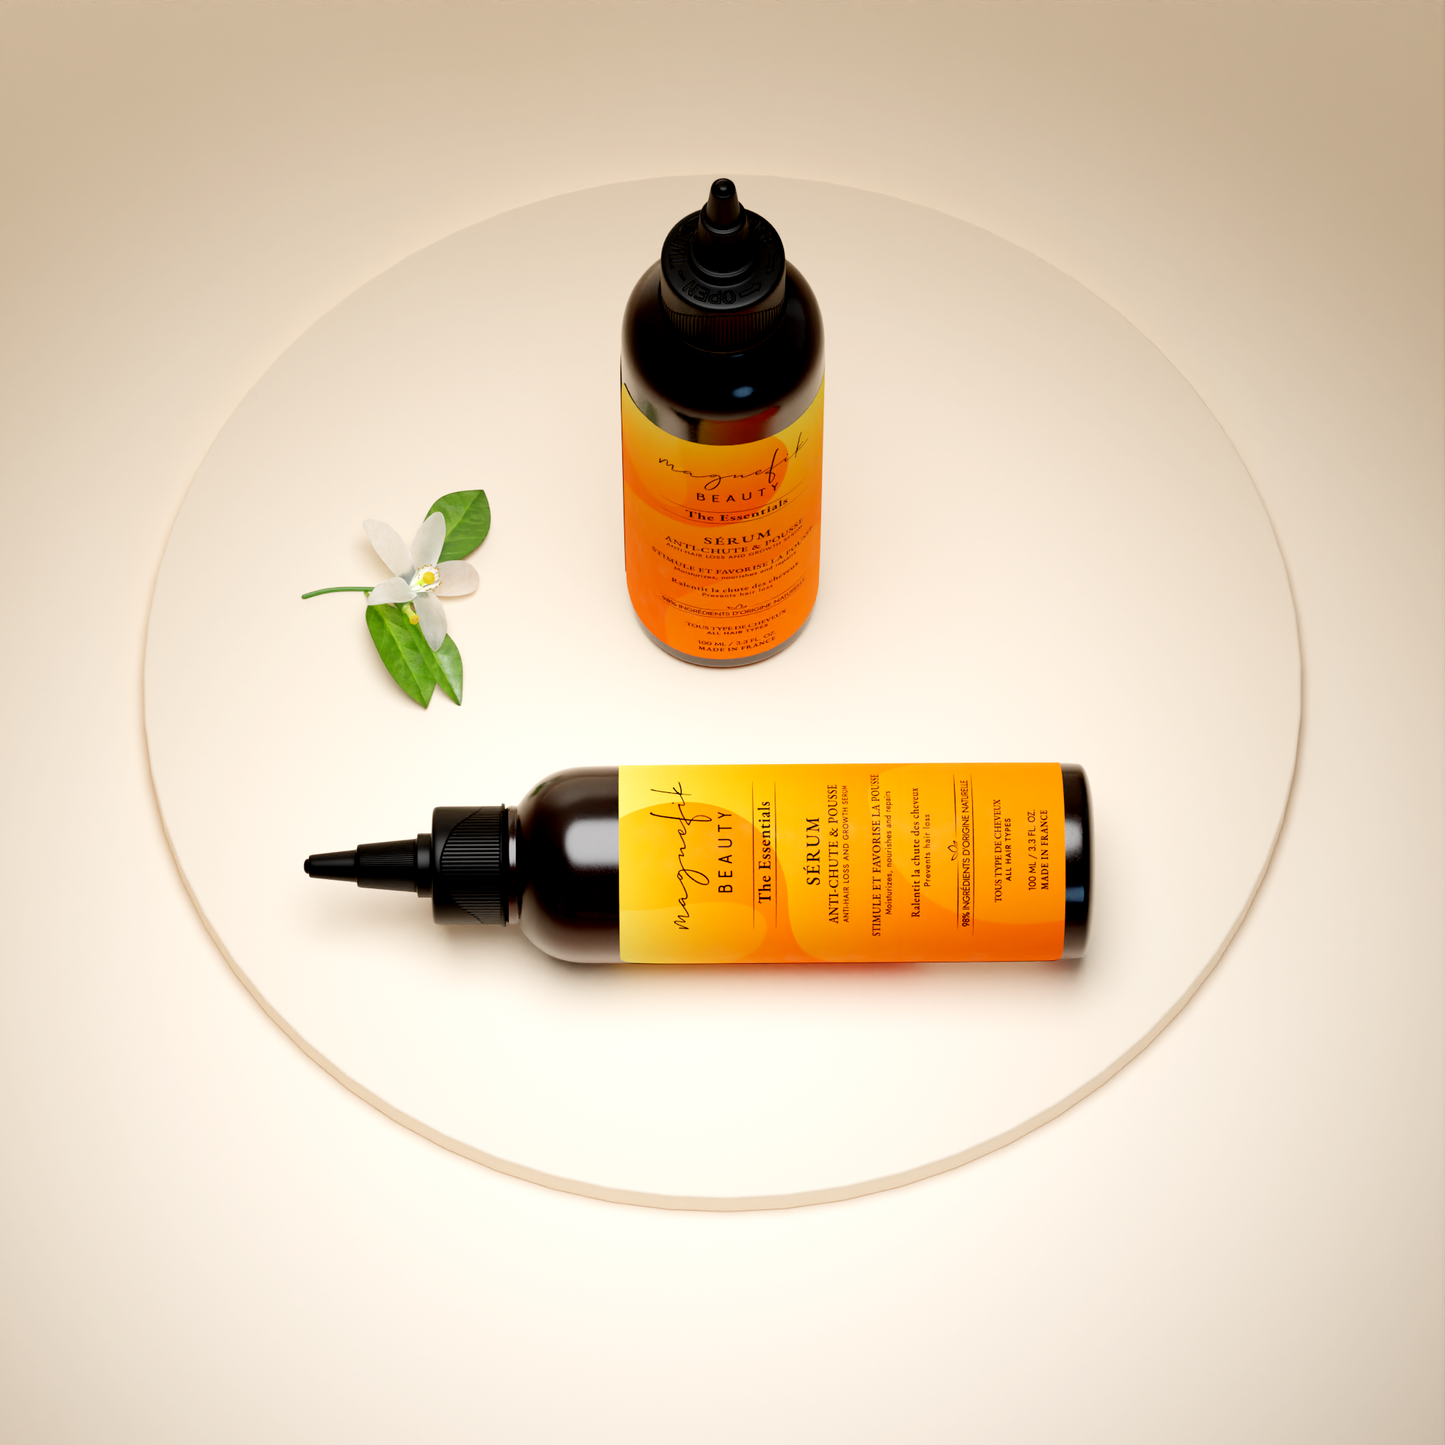 Anti-hair loss and growth serum - The Essentials